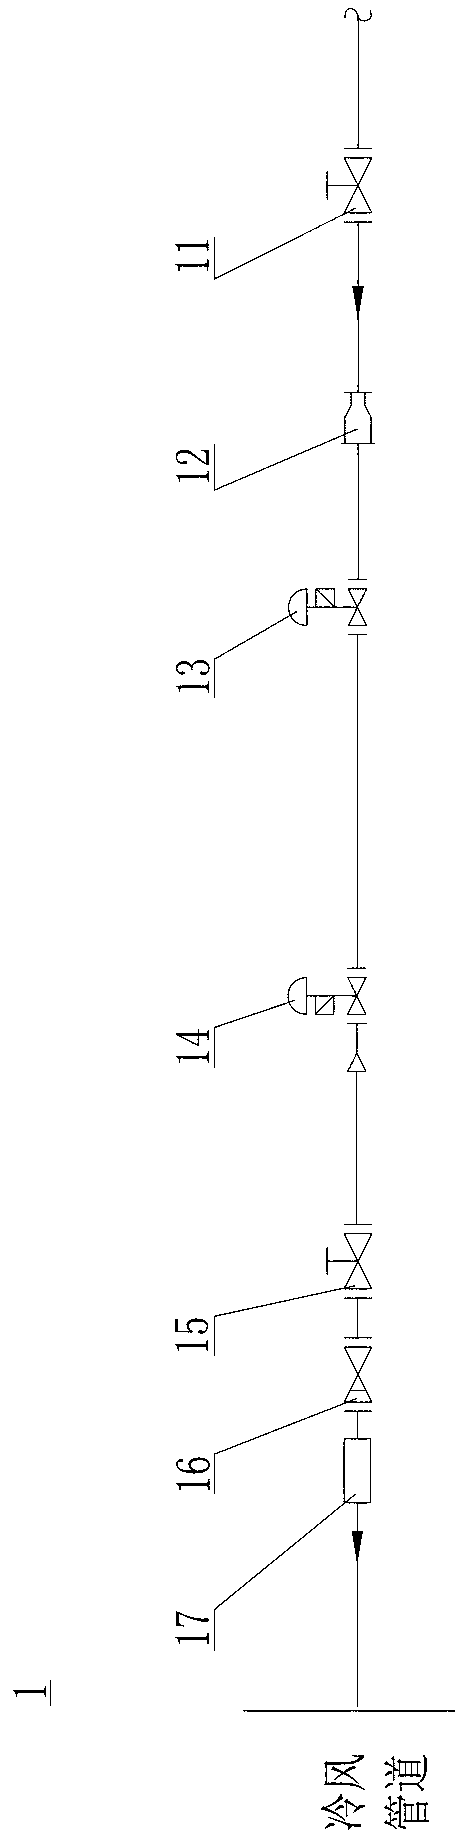 Method for supplying oxygen to blast furnace oxygen-enriched coal spray